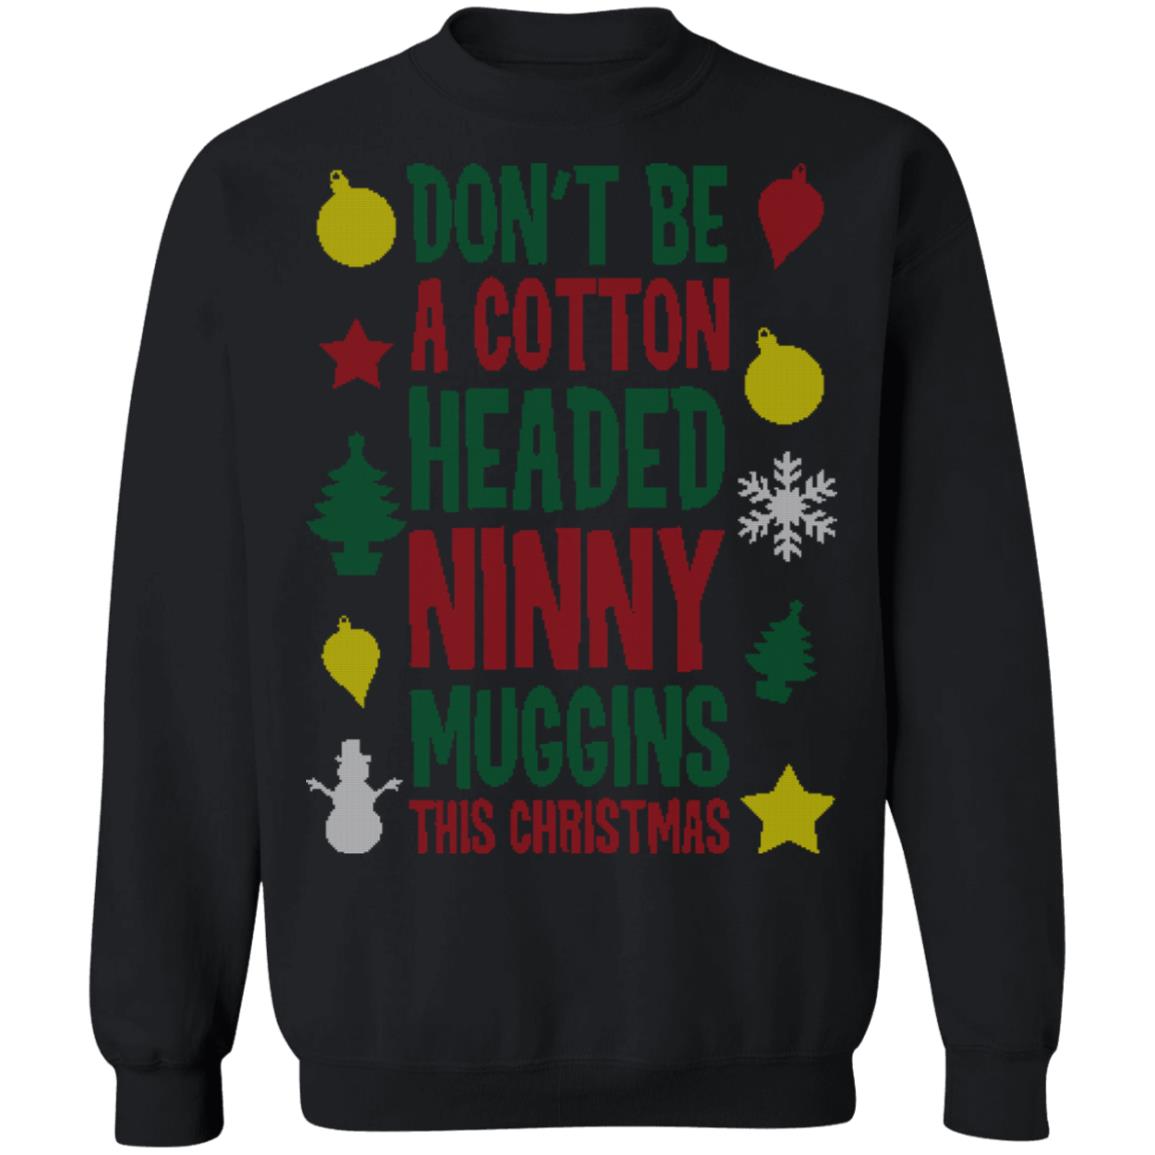 Don't Be A Cotton Headed Ninny Muggins This Christmas Ugly Sweater ...